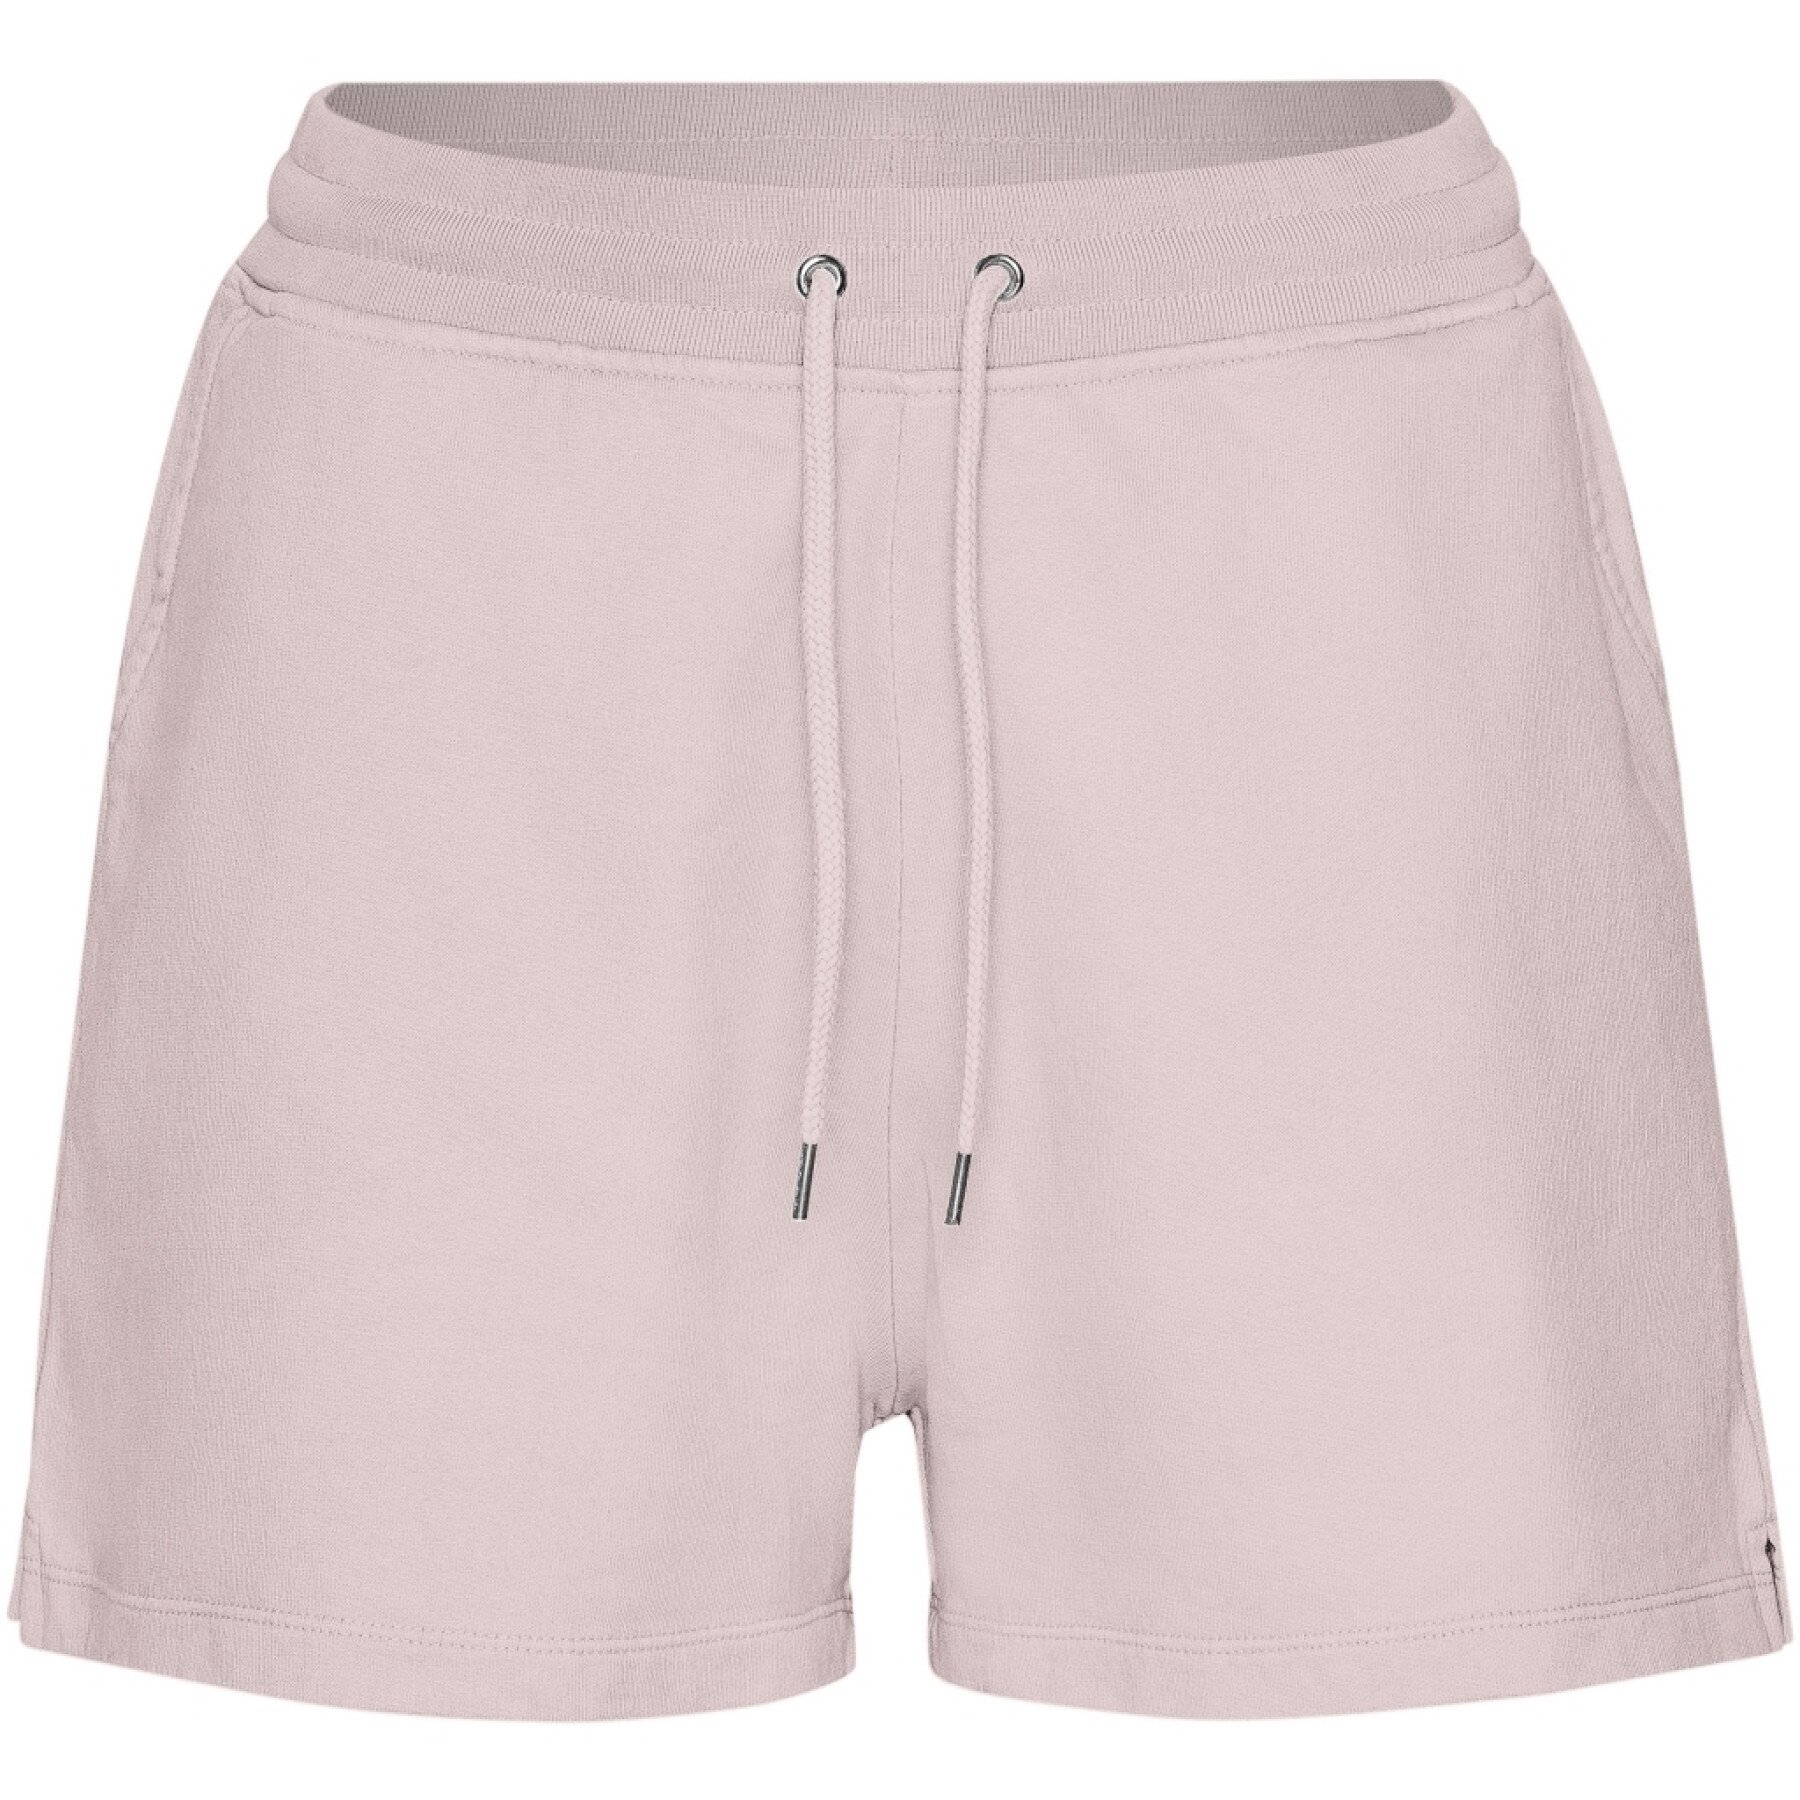 Women's shorts Colorful Standard Organic Faded Pink